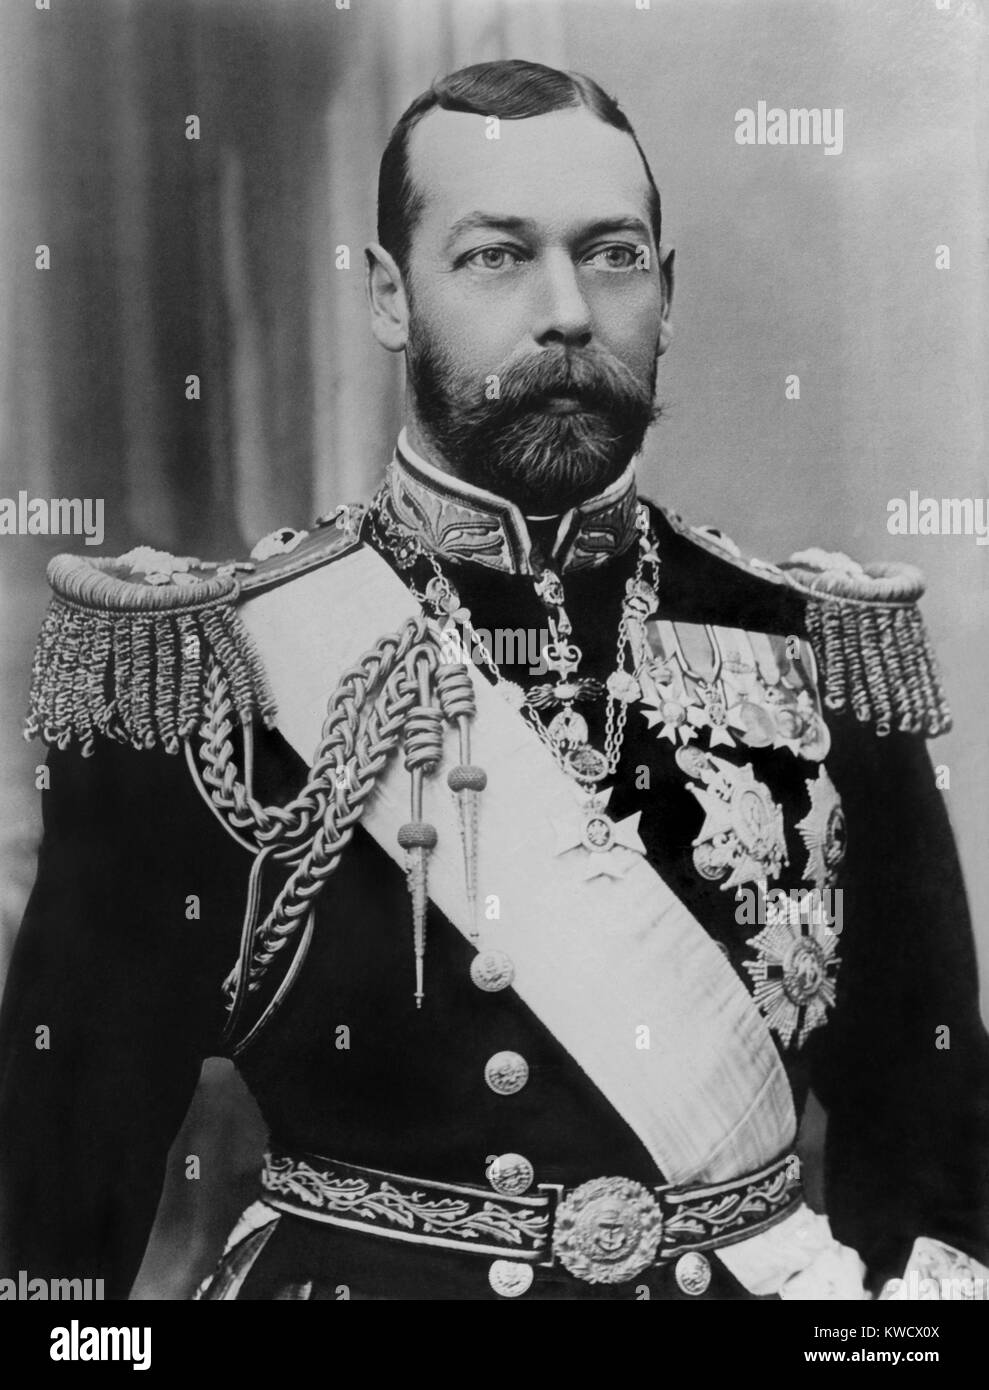 King George V of Britain, c. 1910, shortly after his accession to the throne (BSLOC 2017 1 81) Stock Photo